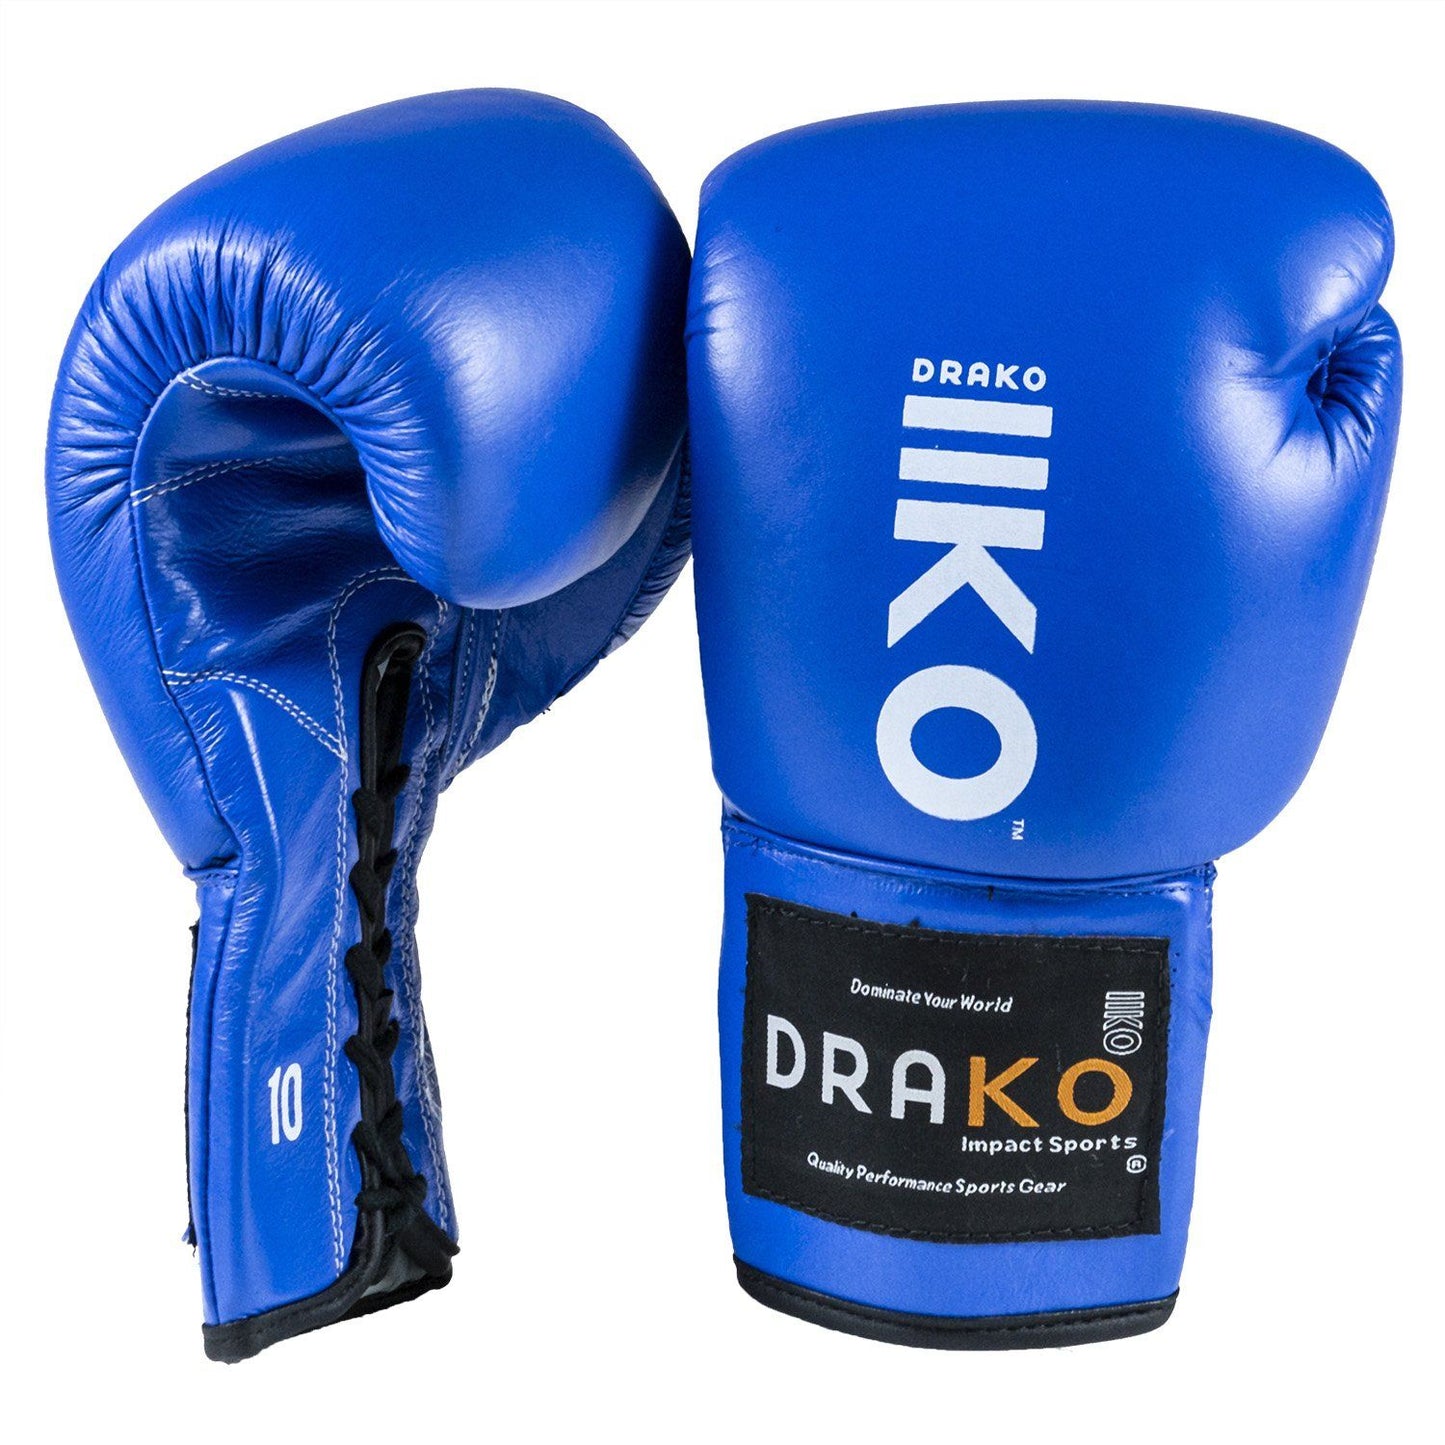 Drako Lace Up Boxing Gloves